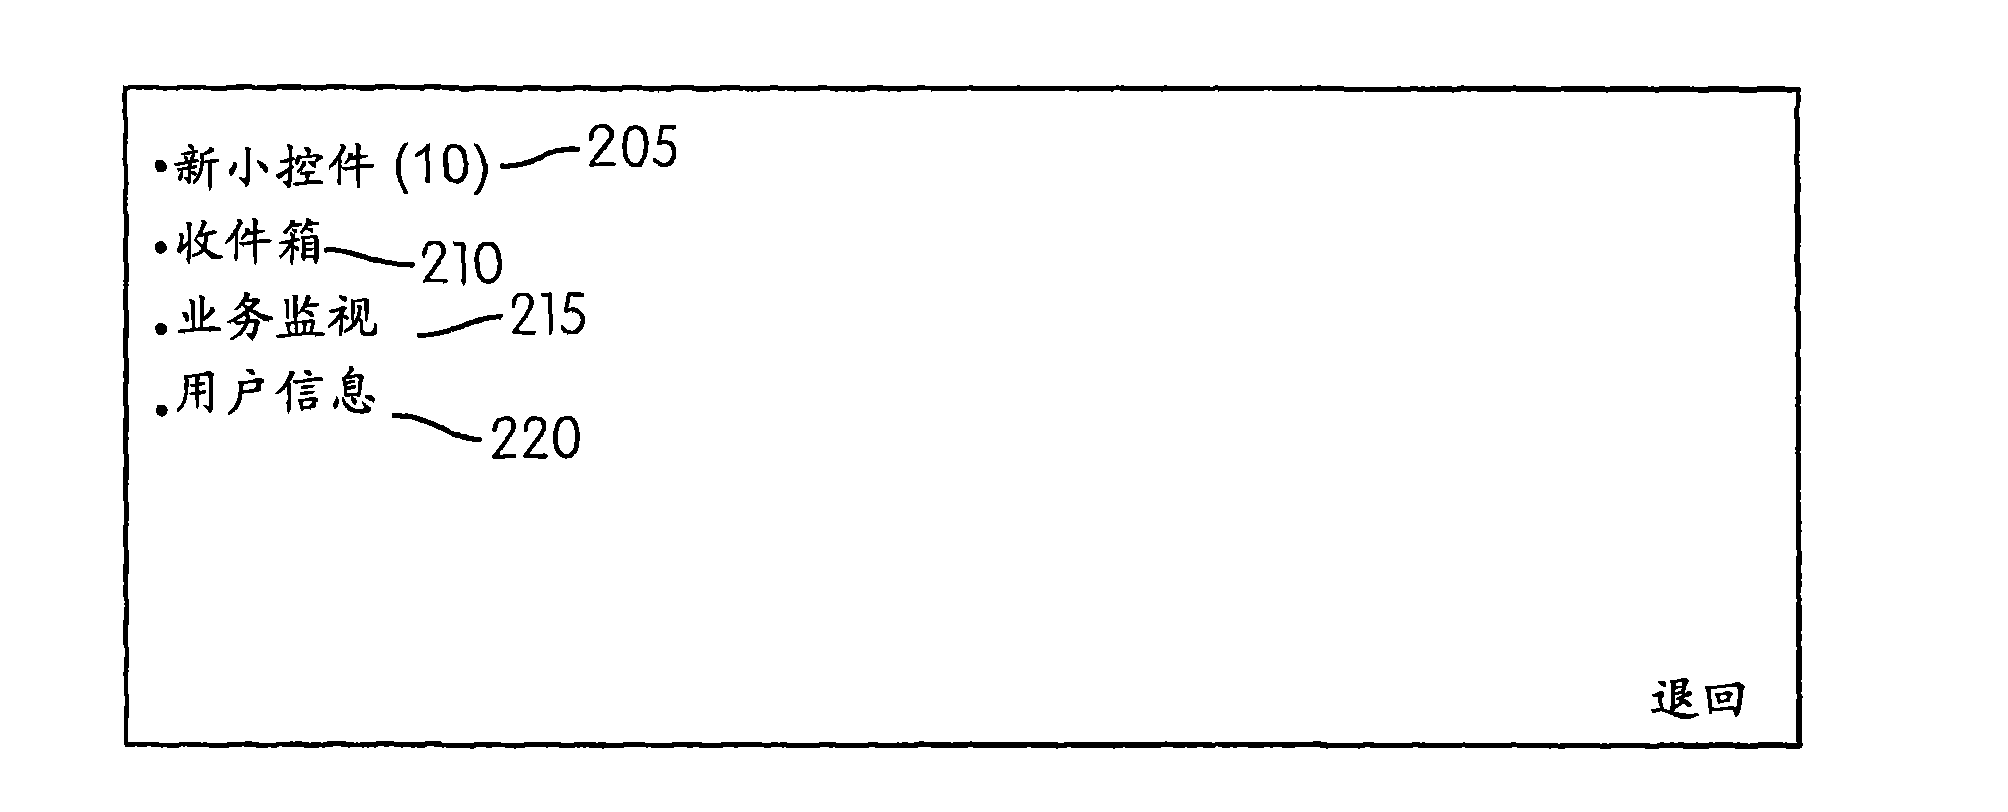 System and method for managing and using electronic widgets